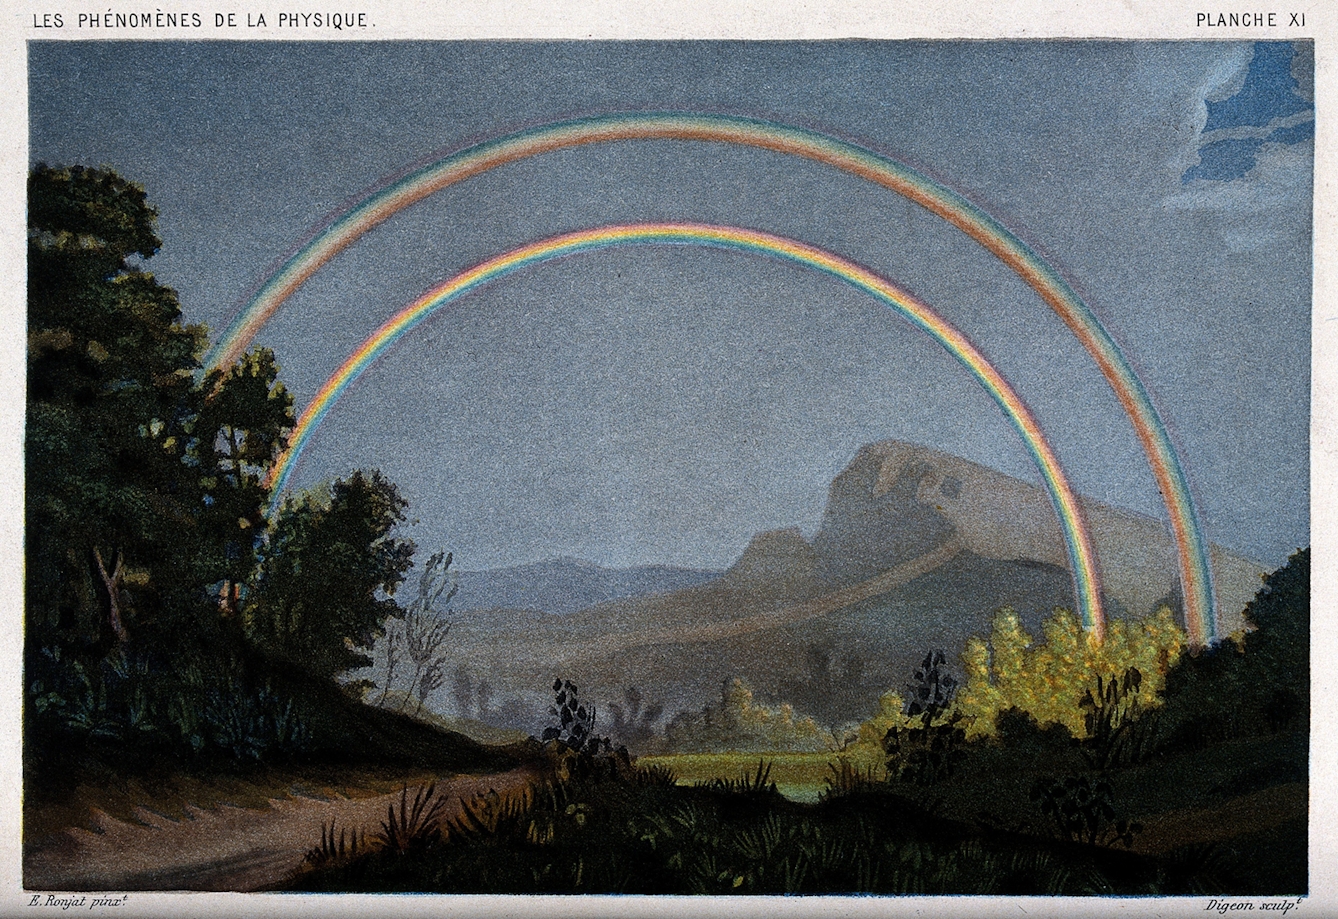 A colour print showing a double rainbow with mountains in the background, and trees in the foreground.